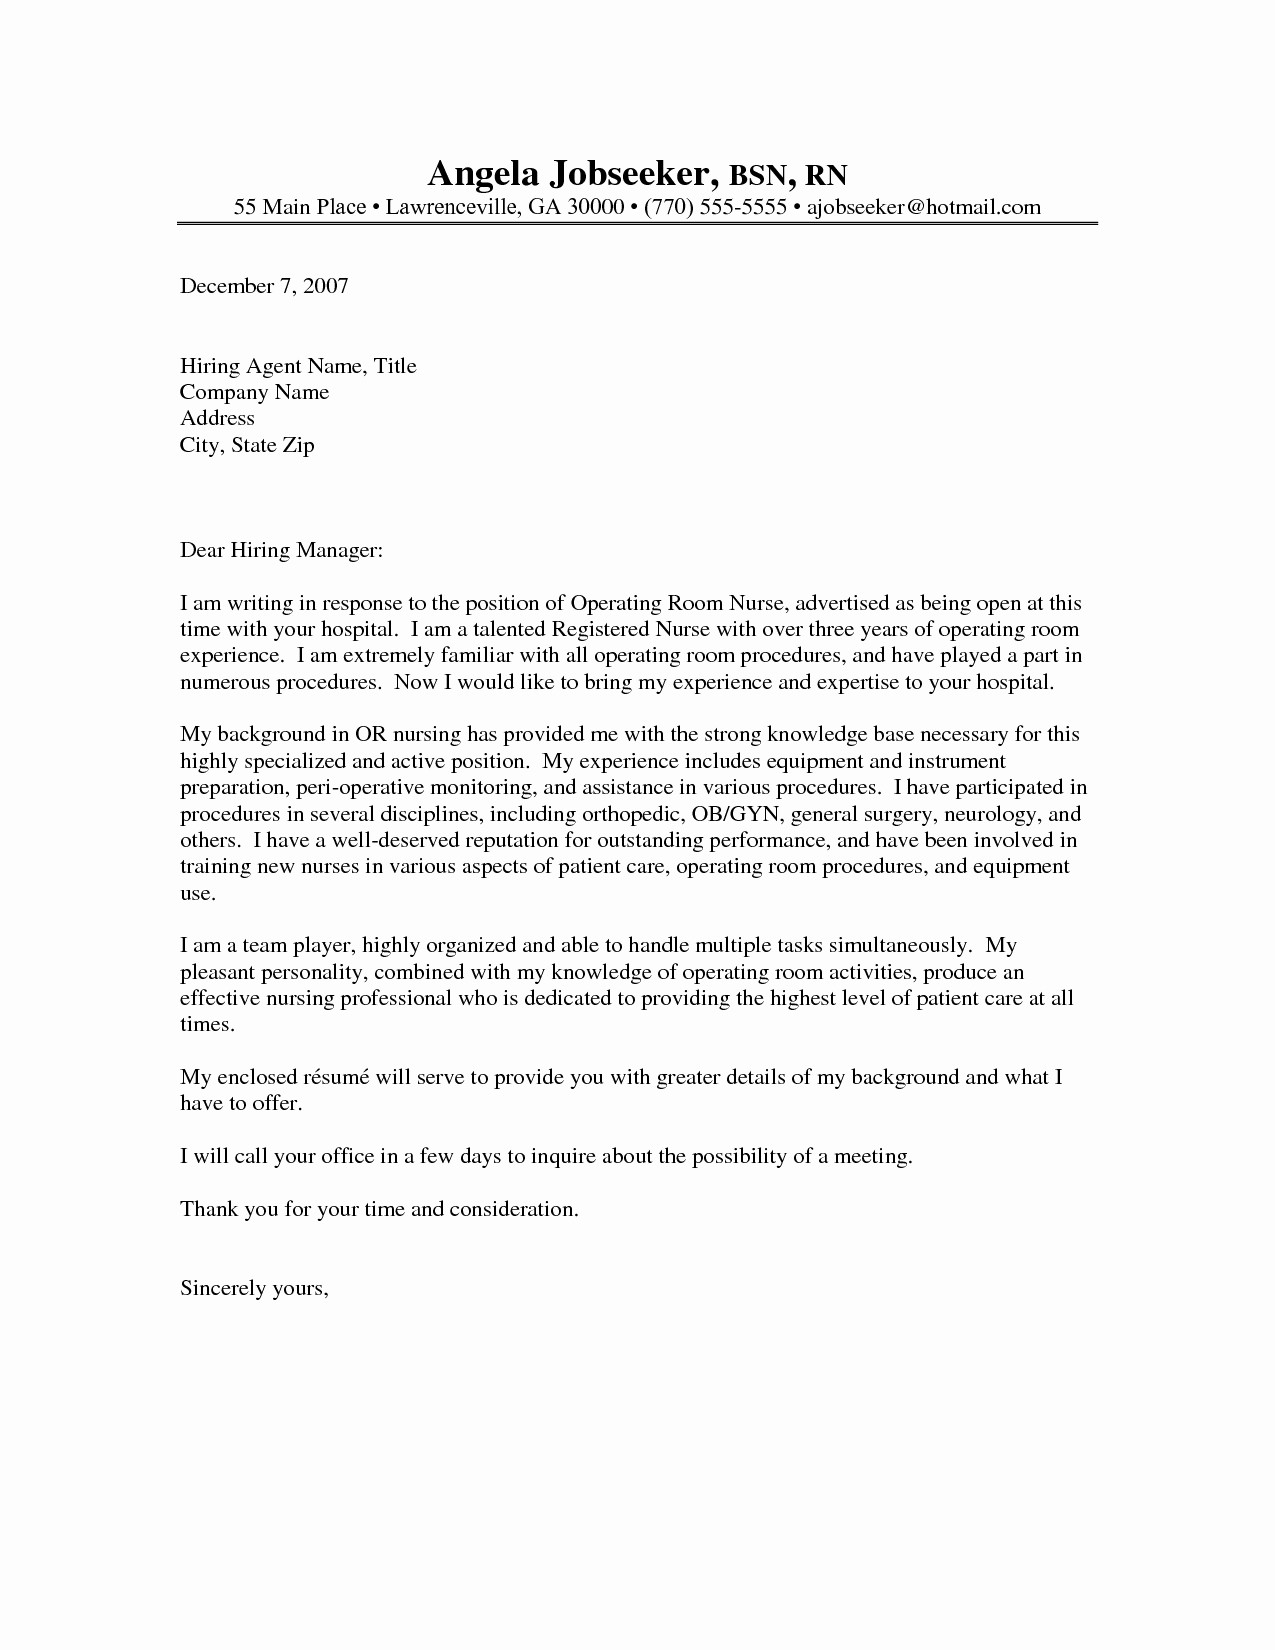 Sample Resume and Cover Letter Awesome Good Cover Letter Examples